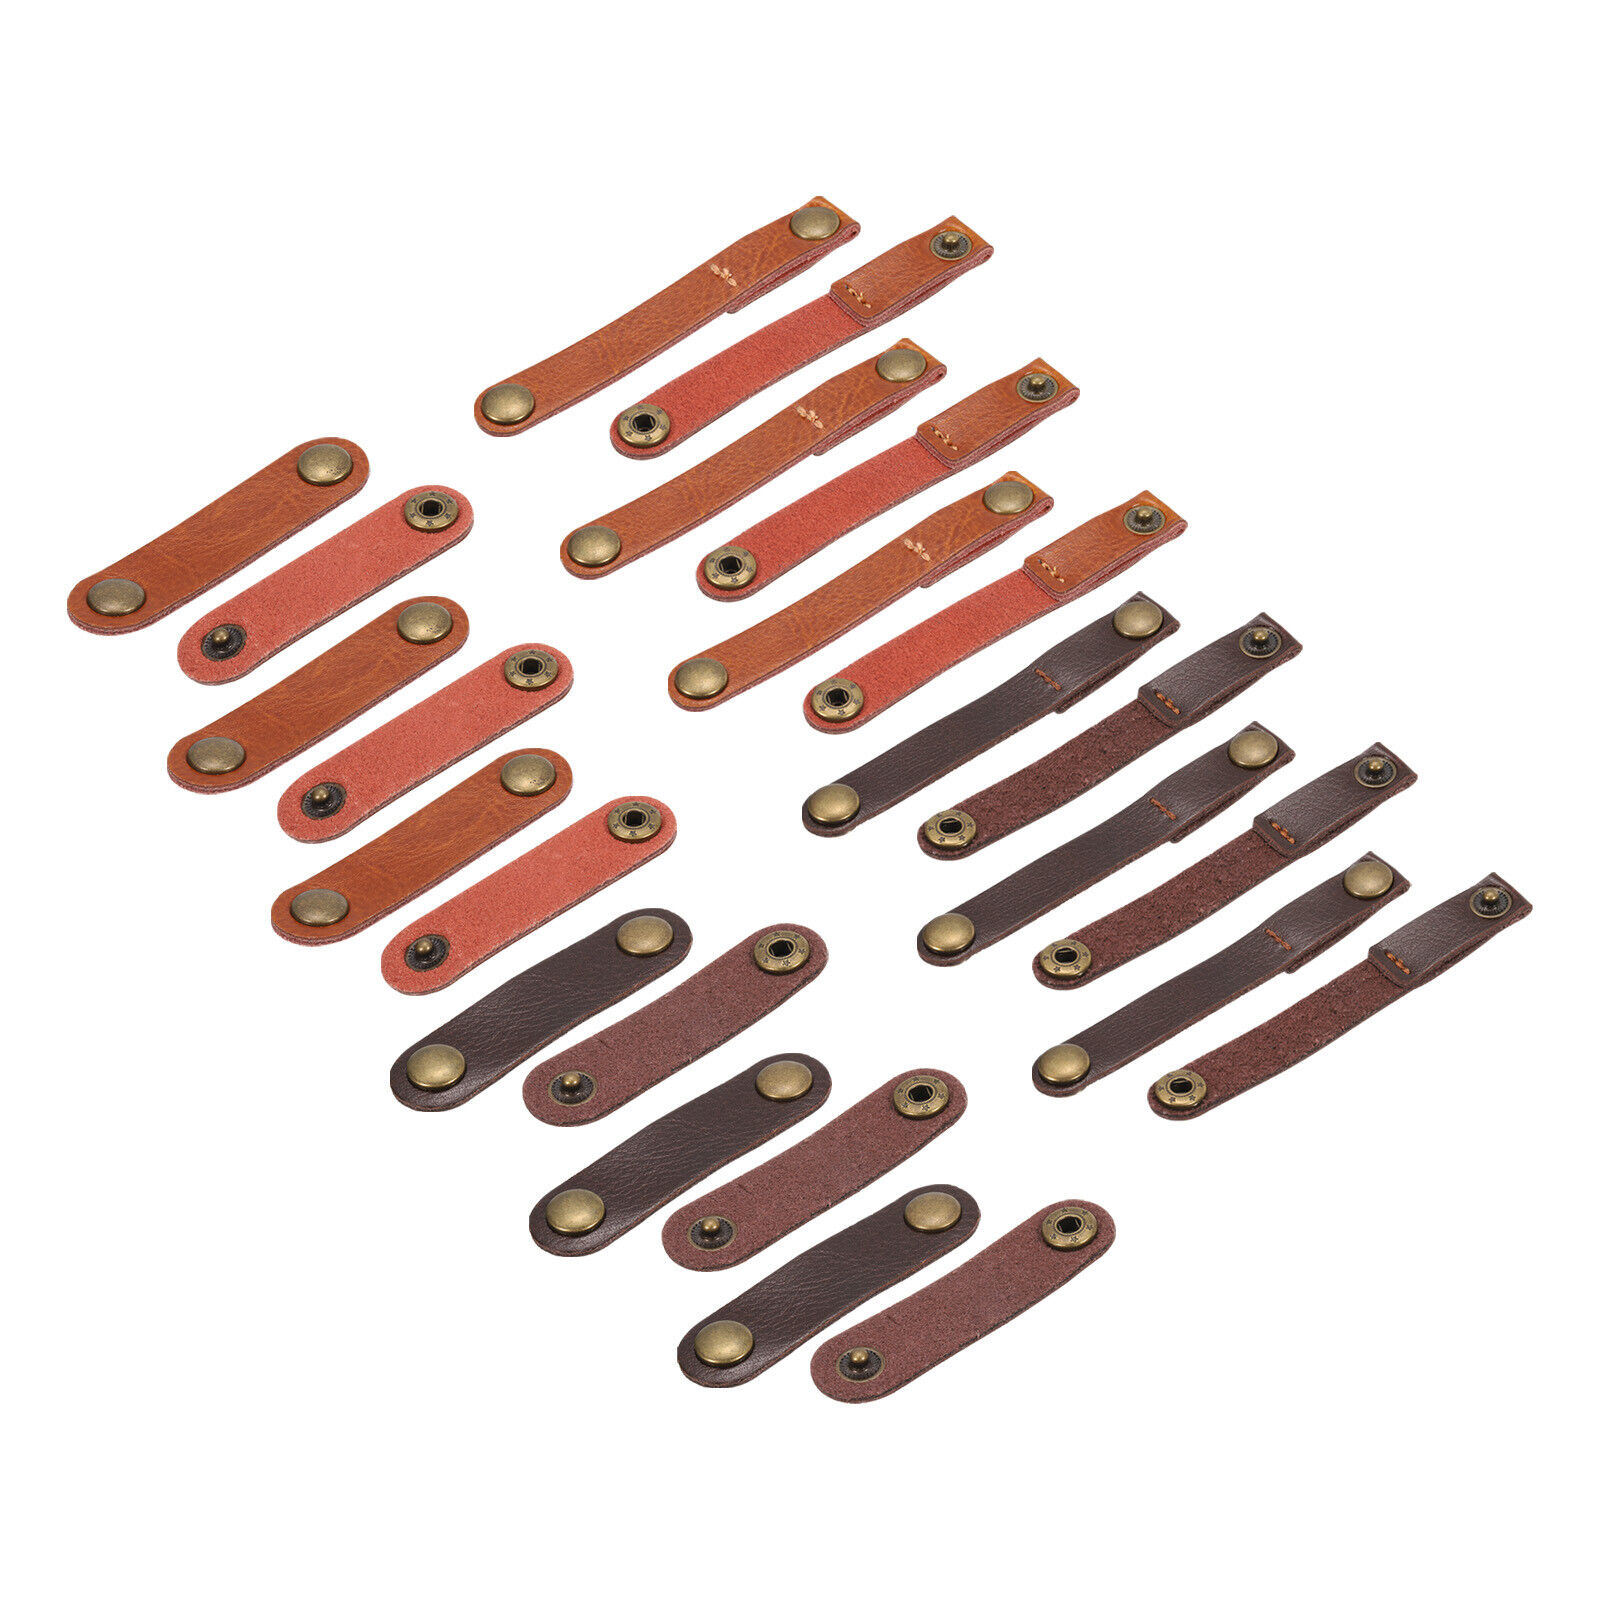 Leather Cable Straps Cable Ties Cord Organizer Brown/Light Brown, 24 Pcs